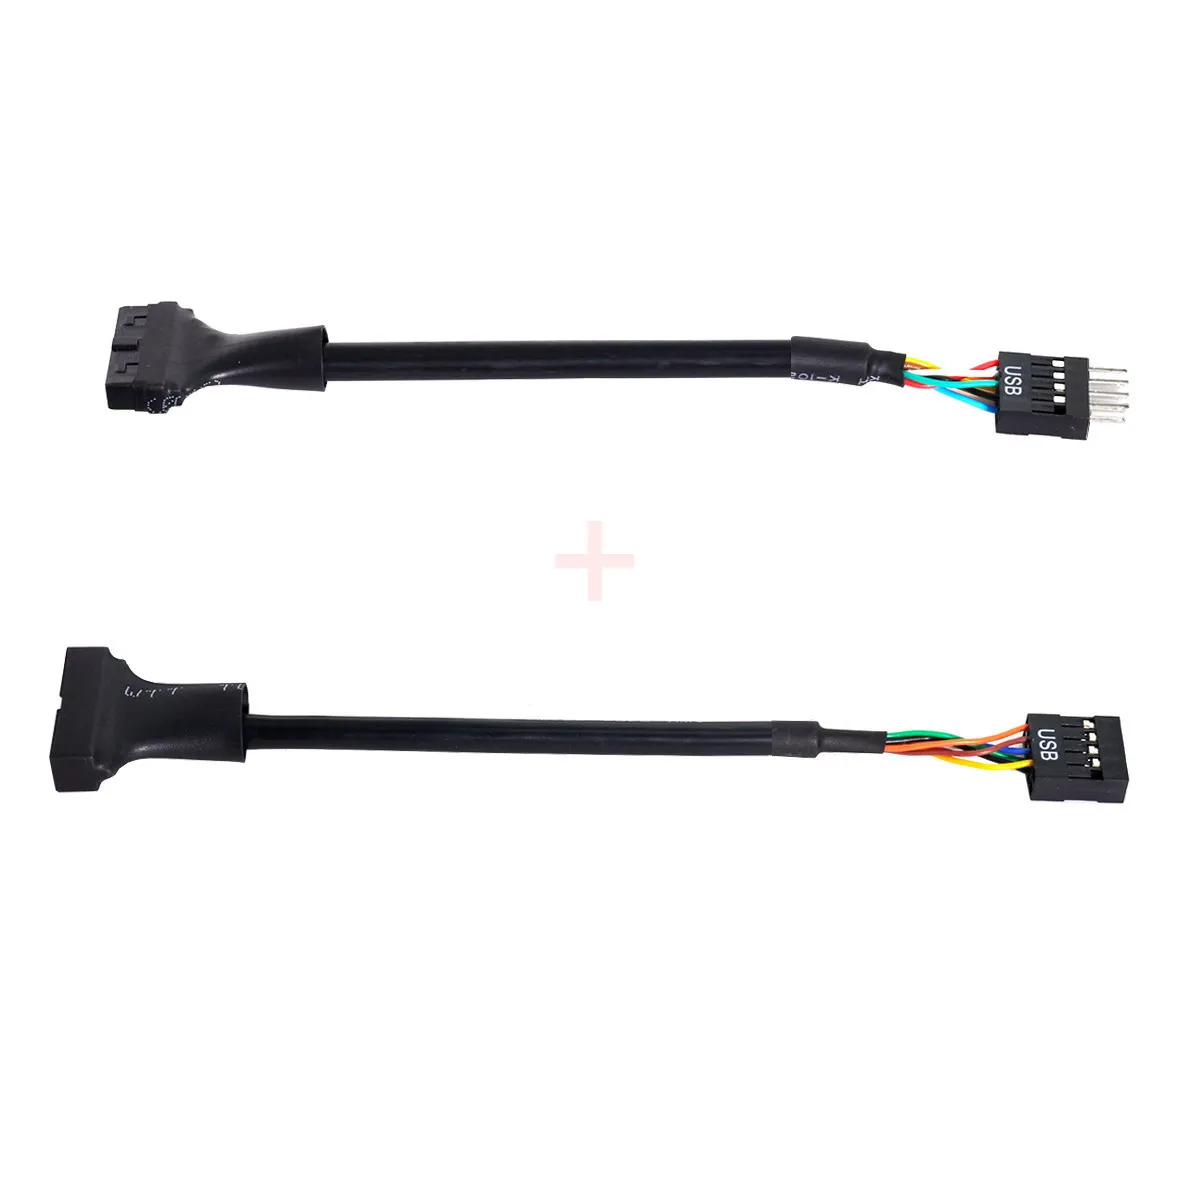 

CY 2pcs USB 2.0 9Pin to USB 3.0 20pin Housing Header Female Cable Reversible for Motherboard